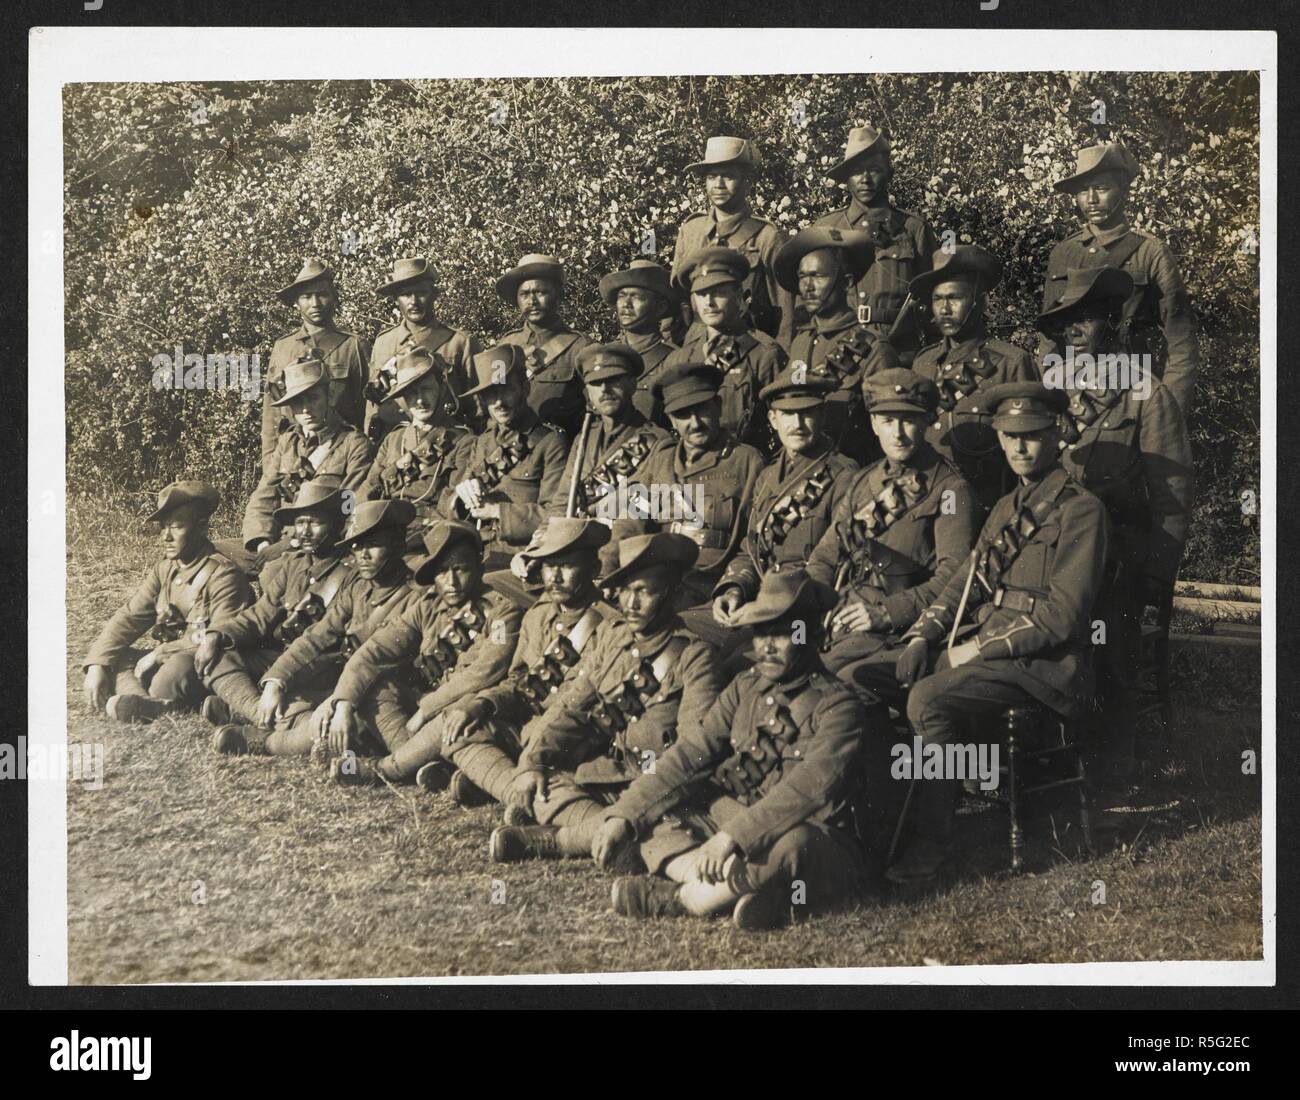 British & Indian officers of 2/2 Gurkhas with Brig. Gen. Norie [ St Floris, France]. Group portrait, in uniform, 23rd July 1915. Record of the Indian Army in Europe during the First World War. 20th century, 23rd July 1915. Gelatin silver prints. Source: Photo 24/(67). Author: Girdwood, H. D. Stock Photo